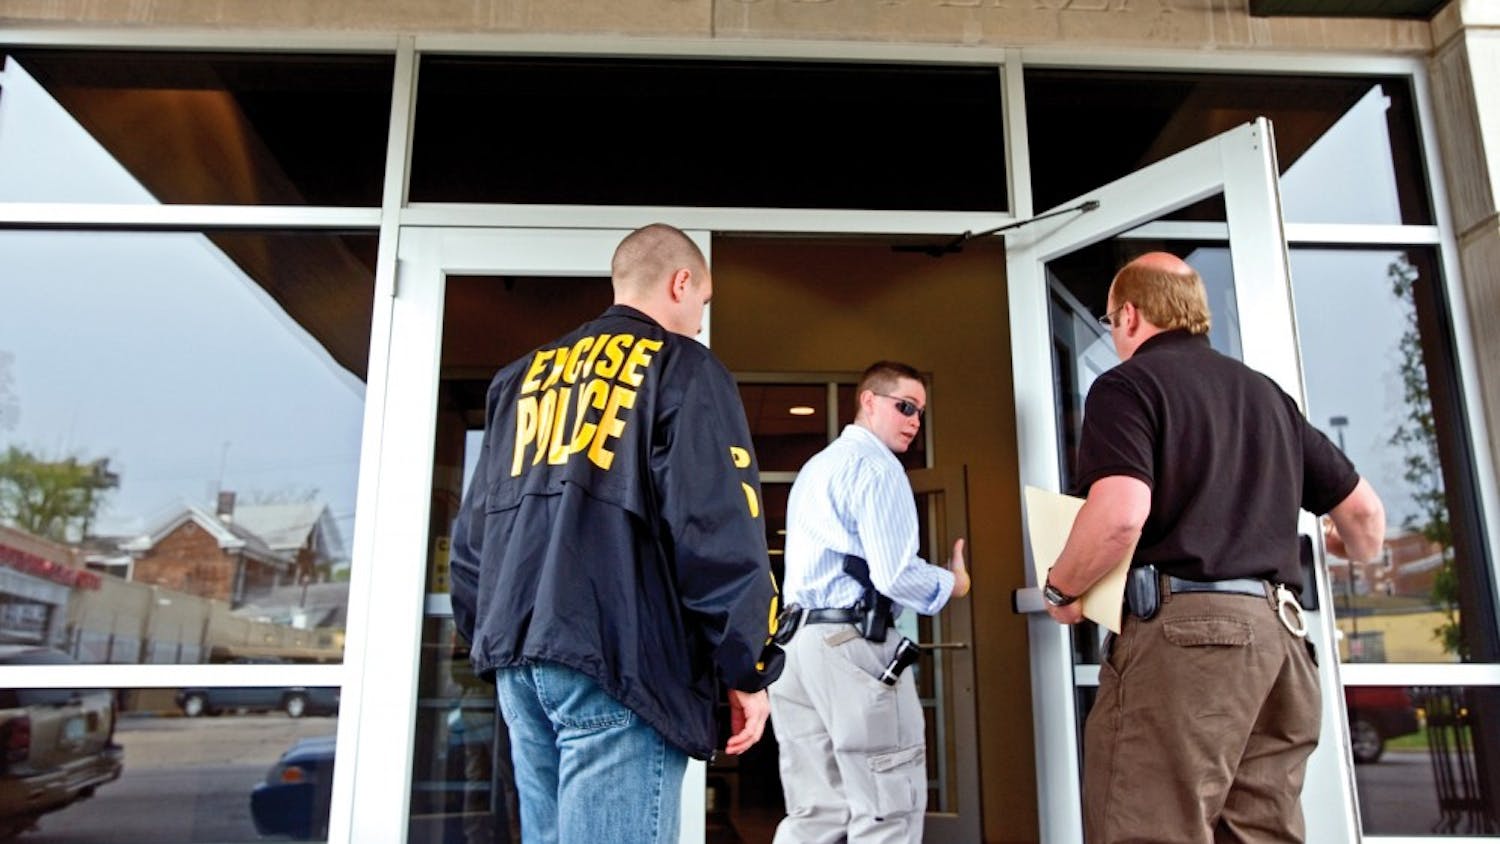 Excise police enter Smallwood Plaza in 2007. Excise is the arm of Indiana’s police focused on alcohol and tobacco law enforcement.